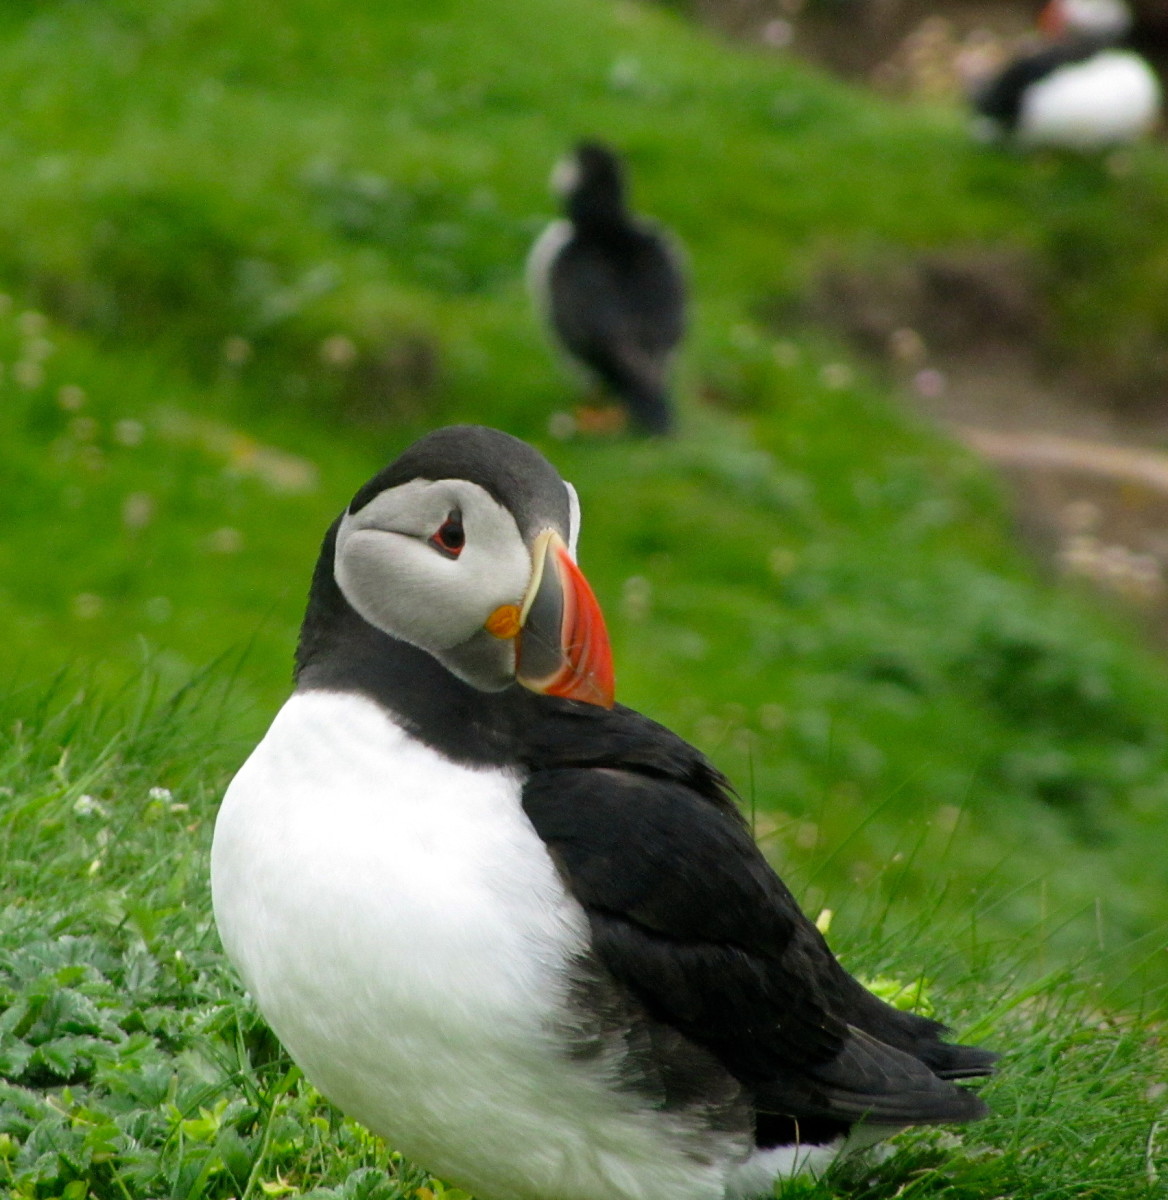 Are Puffins Endangered?